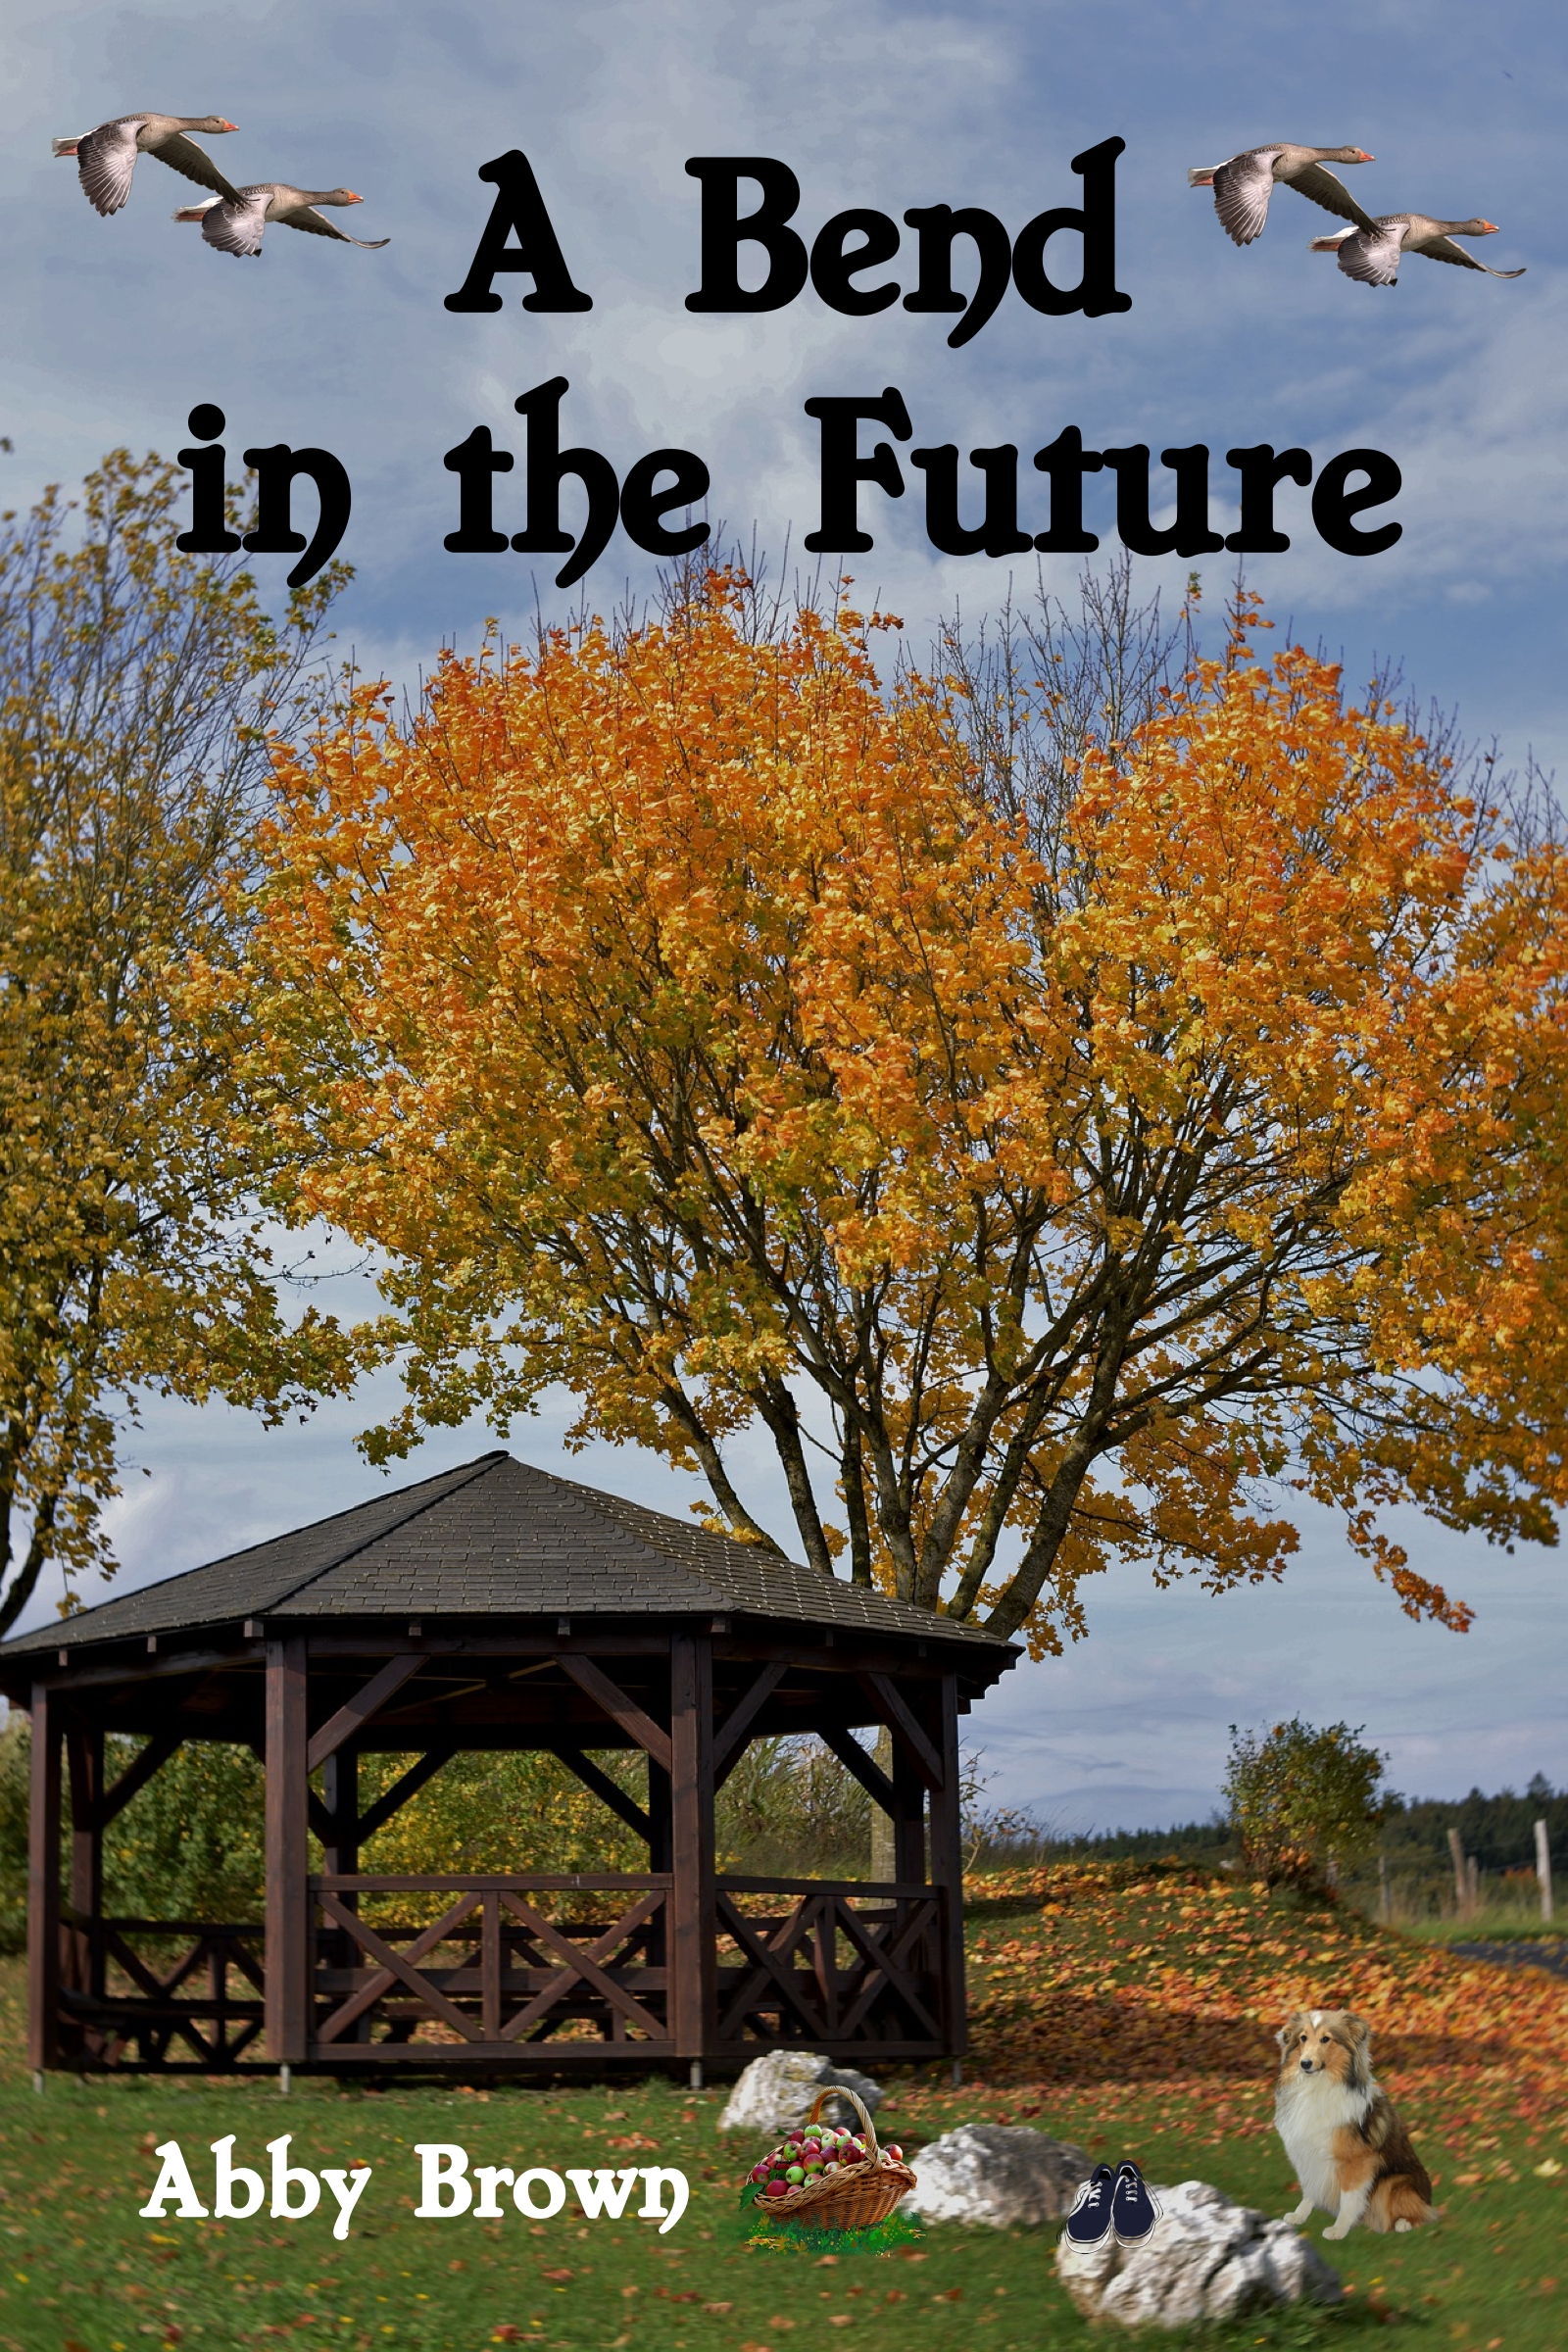 FREE: A Bend in the Future by Abby Brown